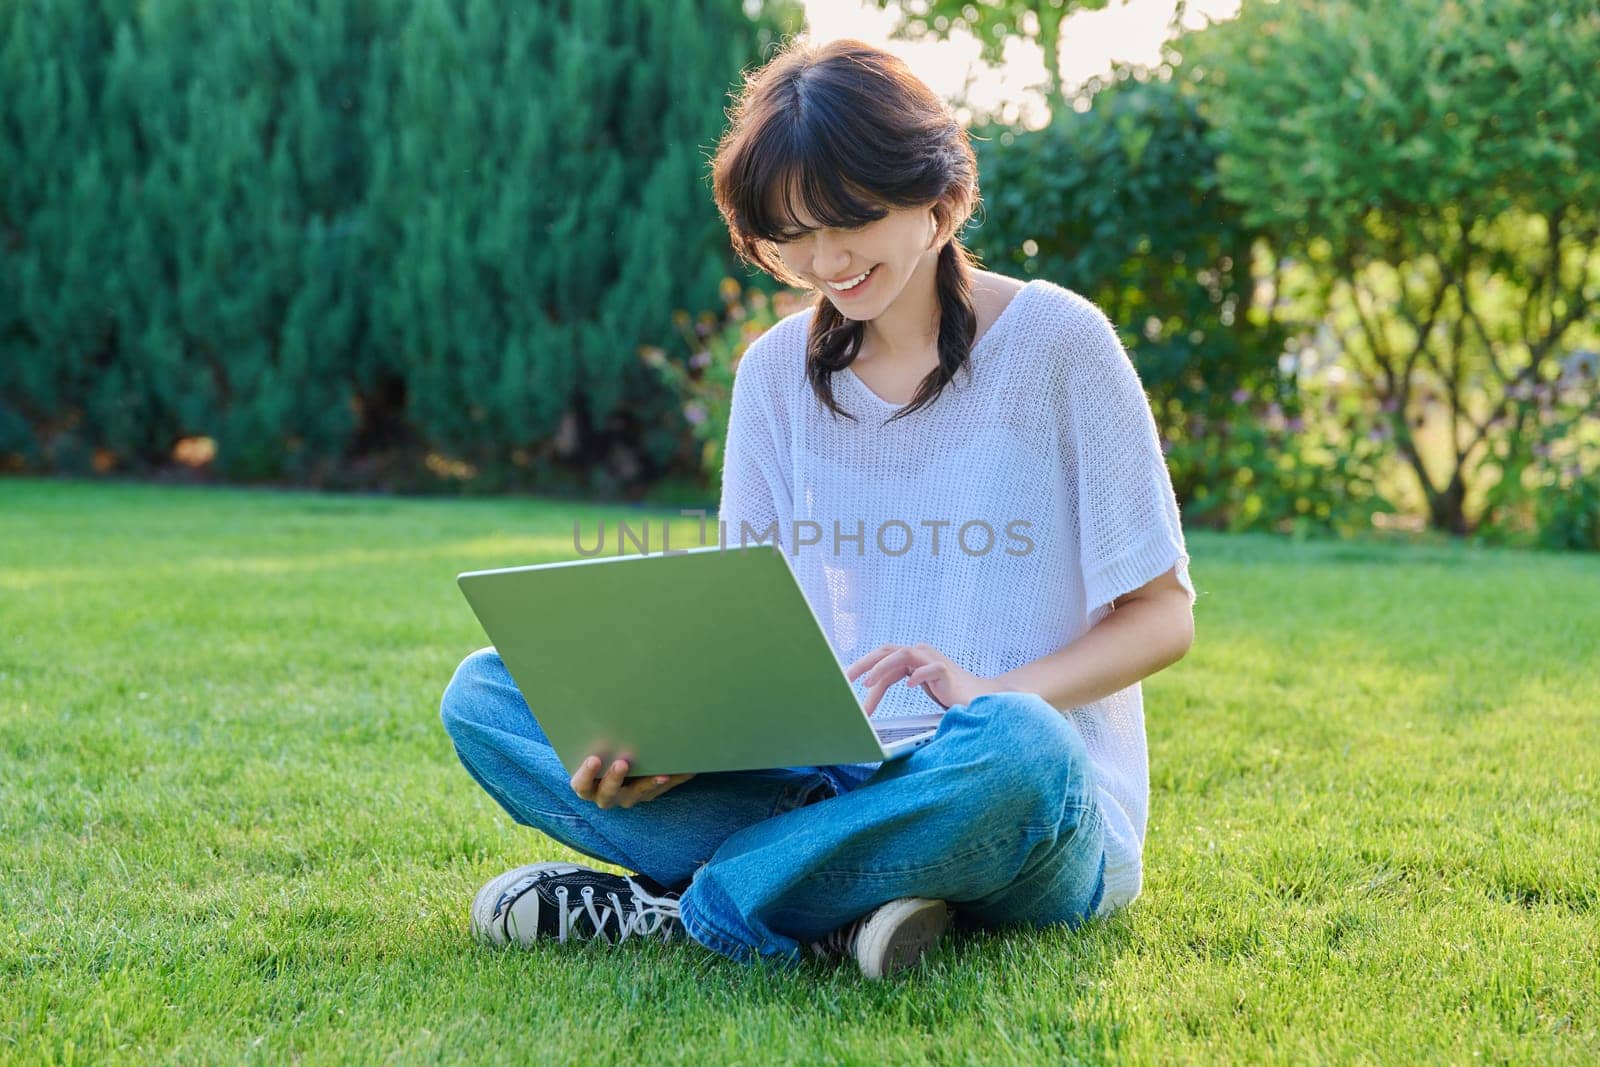 Teenage girl sitting on the grass using a laptop. Female teenager student 18, 19 years old sitting on the lawn, technologies for studying leisure communication shopping in backyard in garden